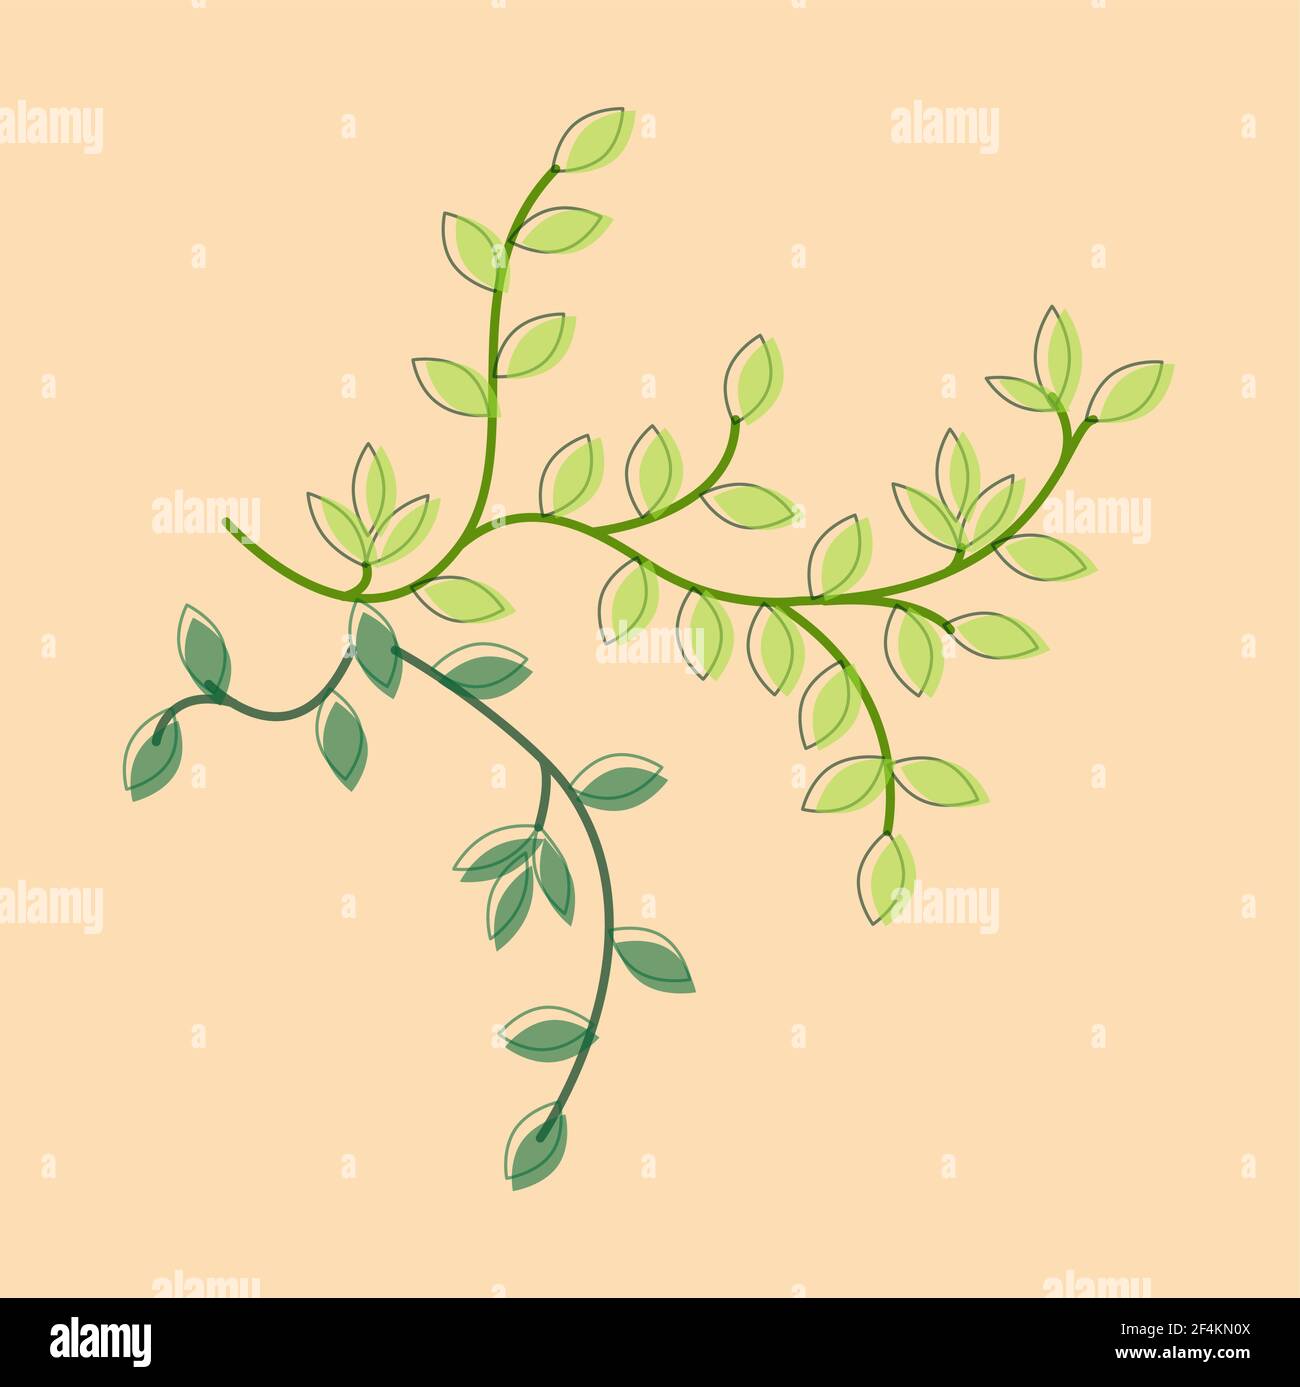 Vector illustration twig with leaves. Patten with green leaf. Stock Vector